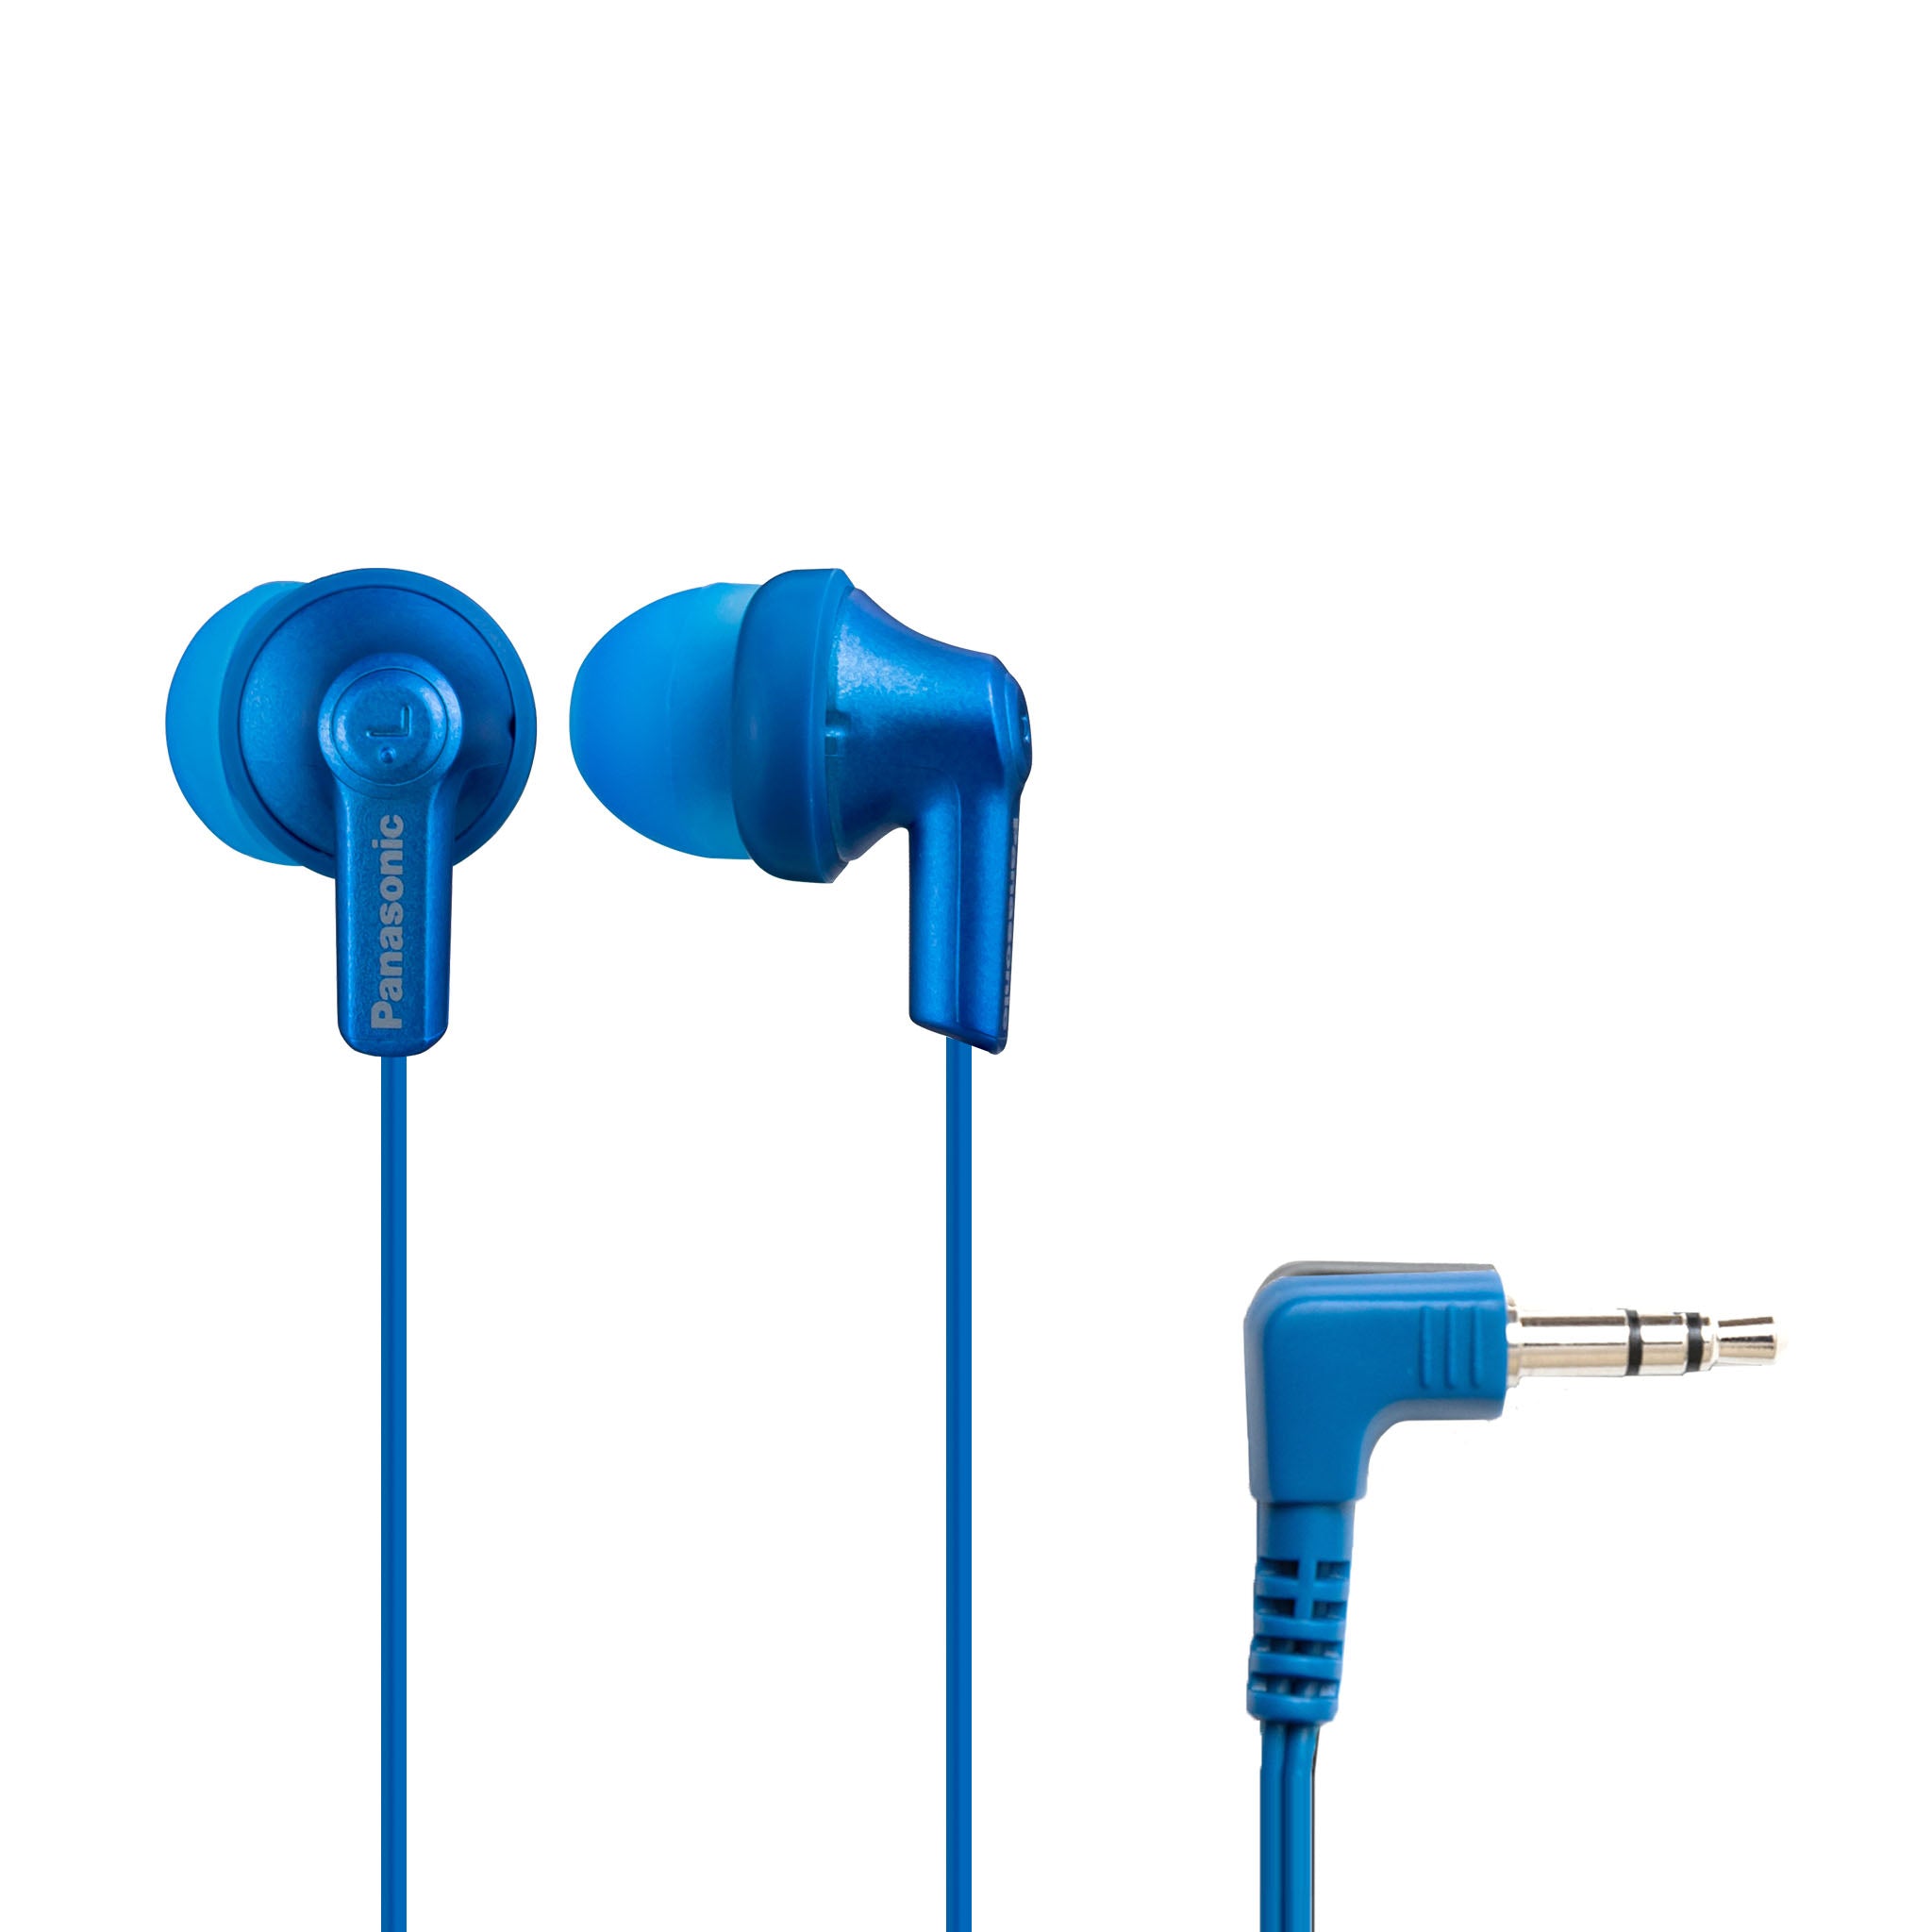 Panasonic ErgoFit In-Ear Earbud Headphones RP-HJE120 Jack 3.5mm Laptops - for with and Phones